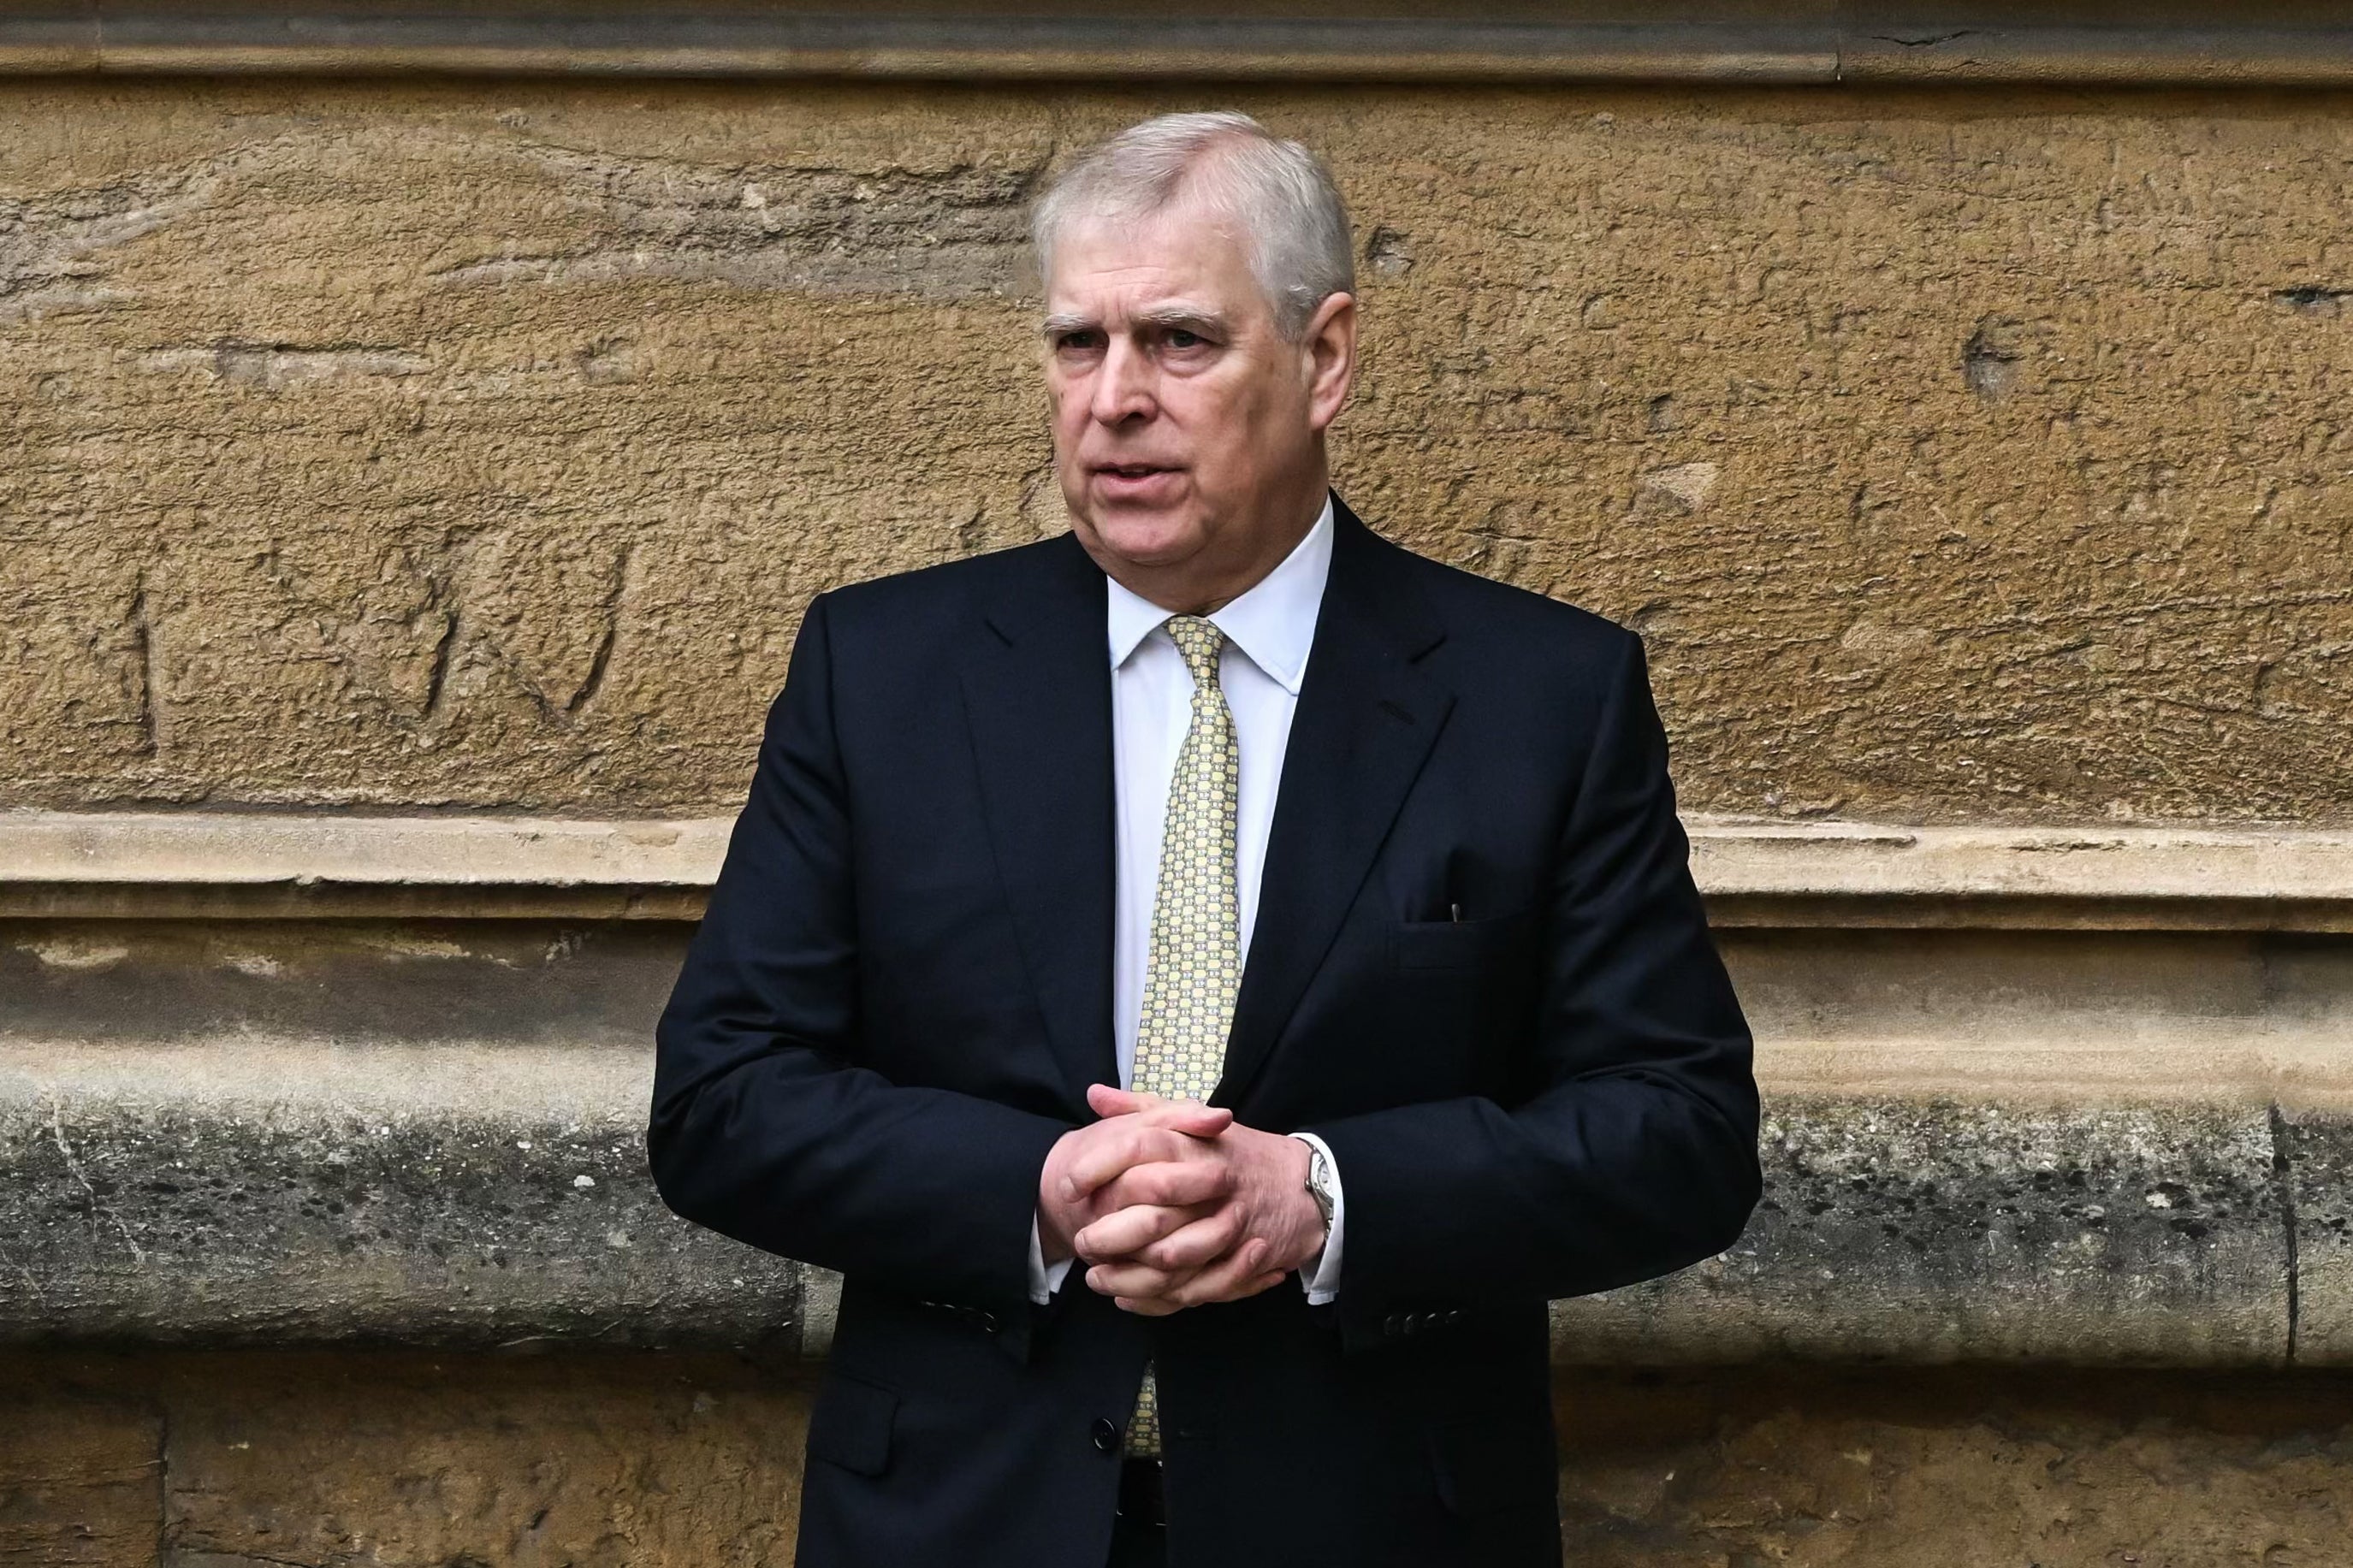 Prince Andrew said he has ‘regret for his association’ with Epstein